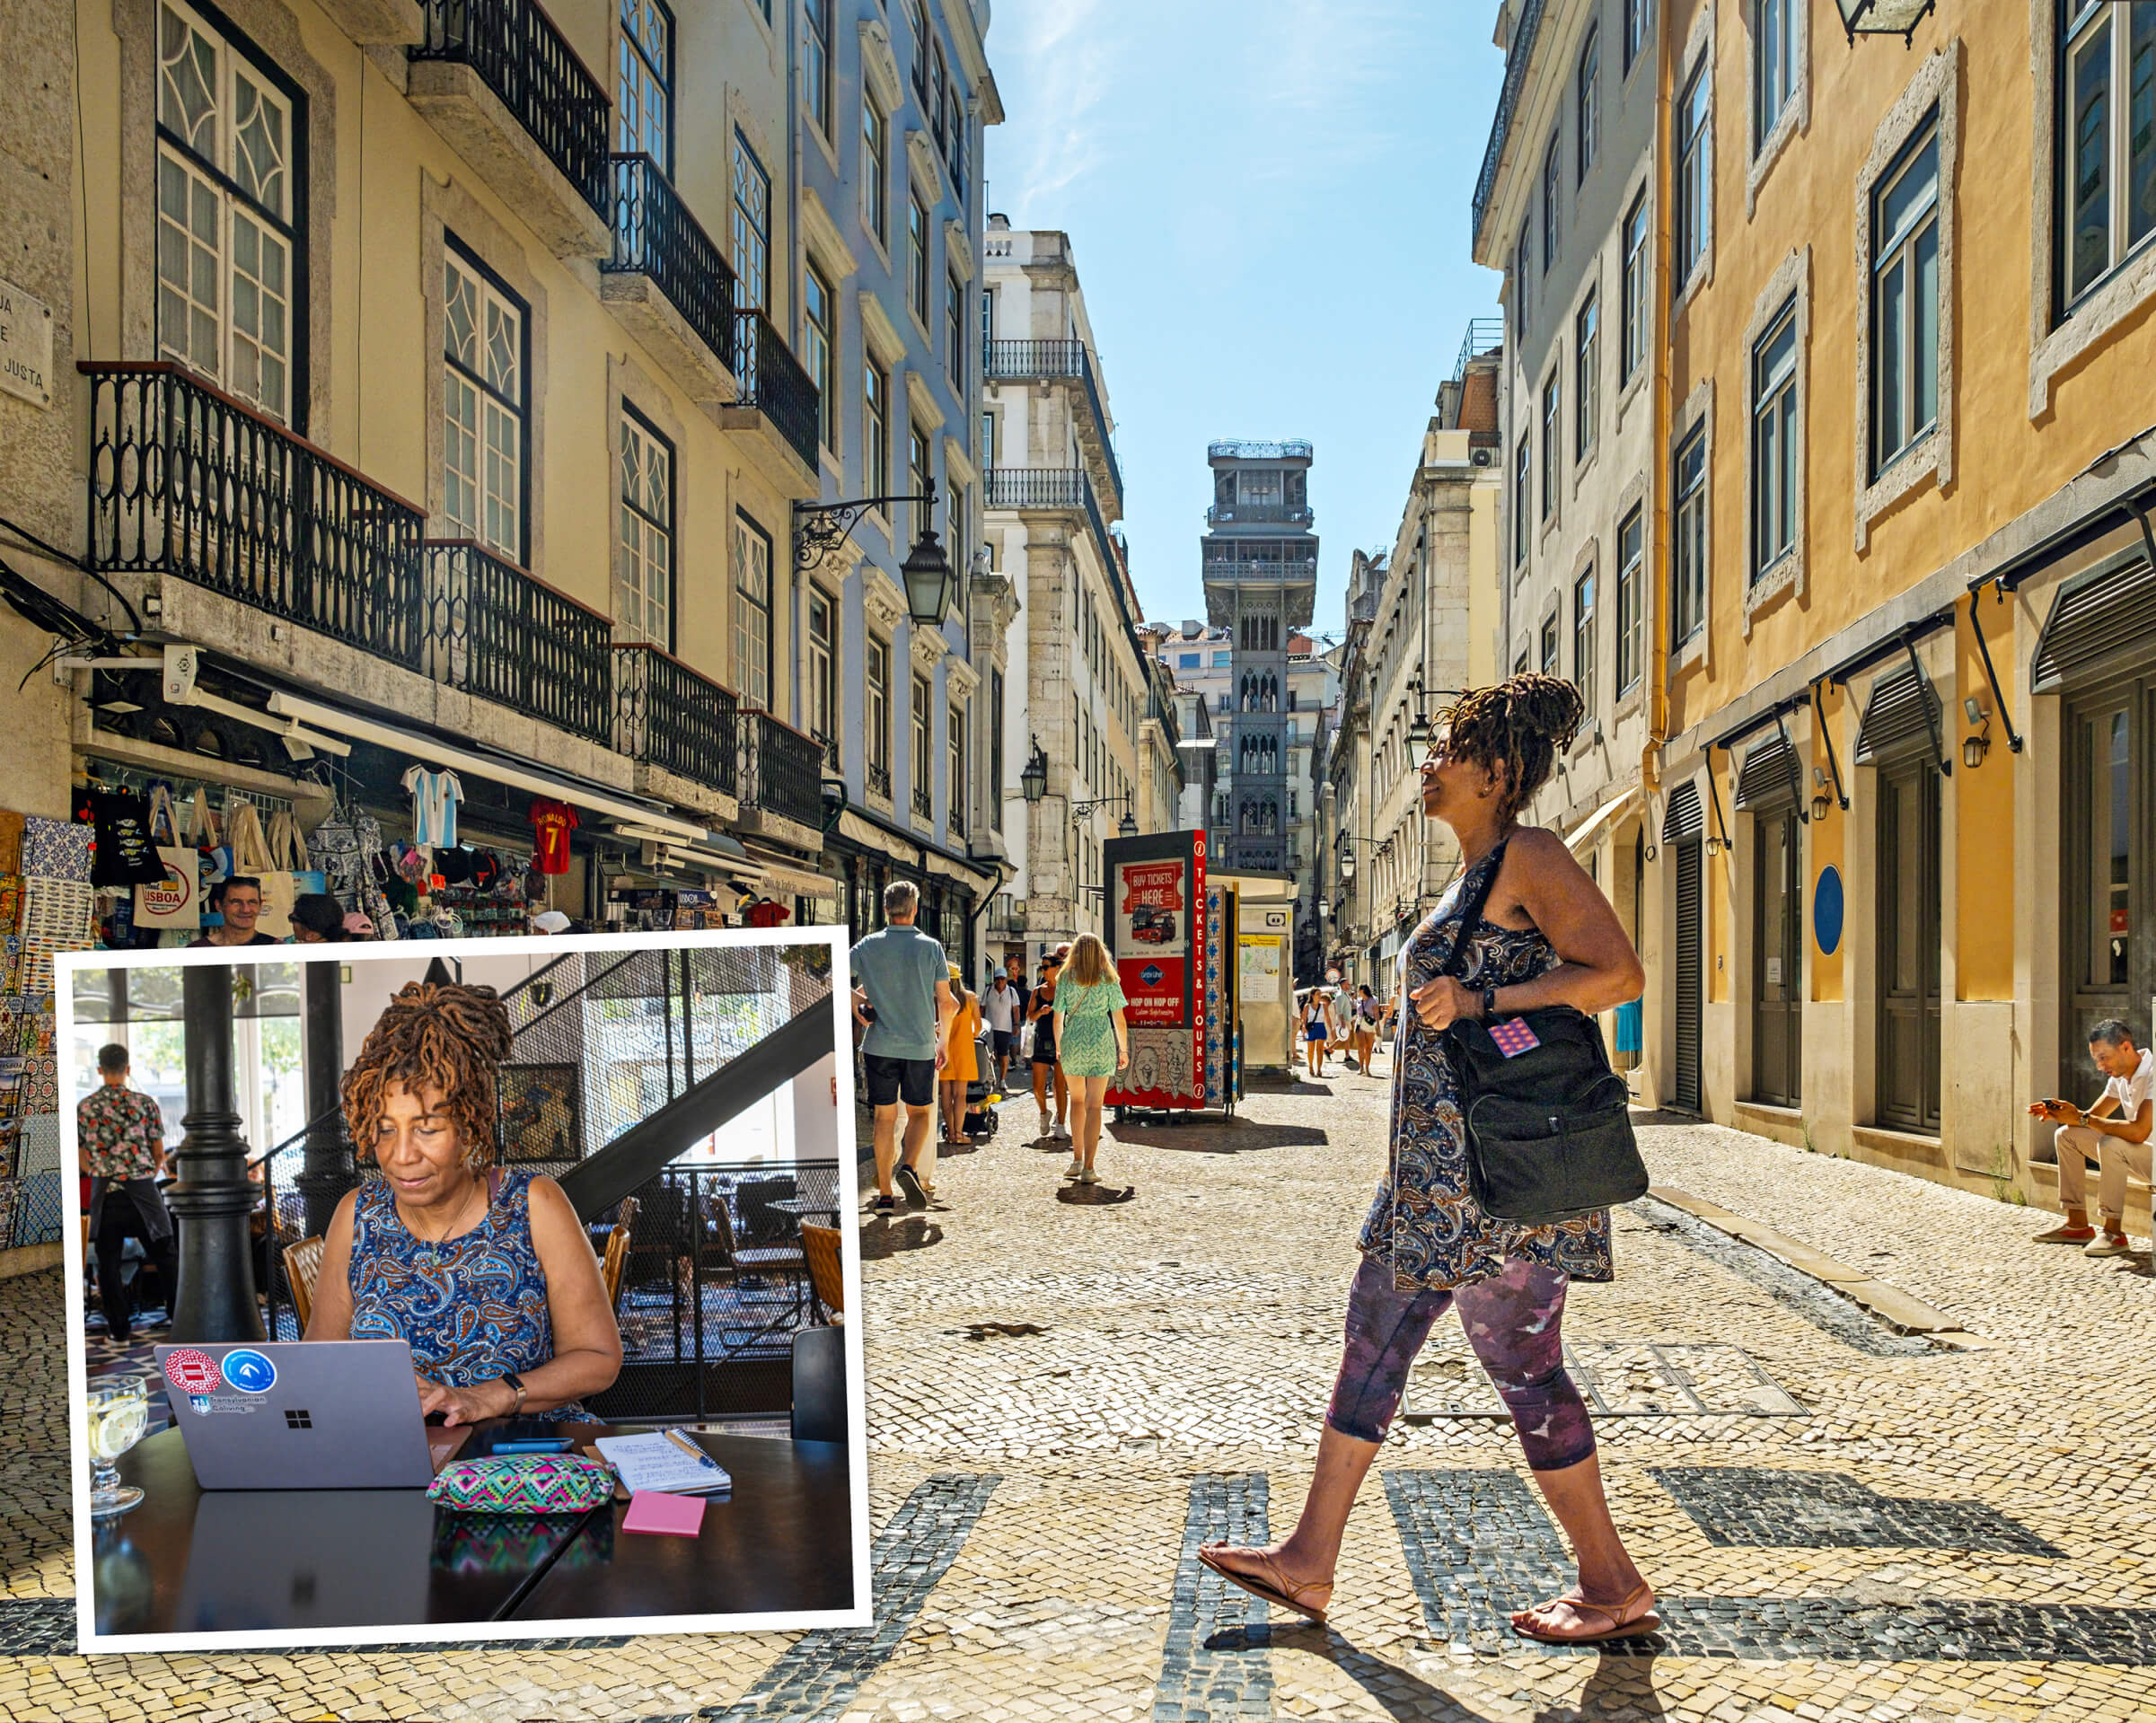 Photo of Siobhan Farr walking in Lisbon, Portugal with an inset photo showing her working at her office